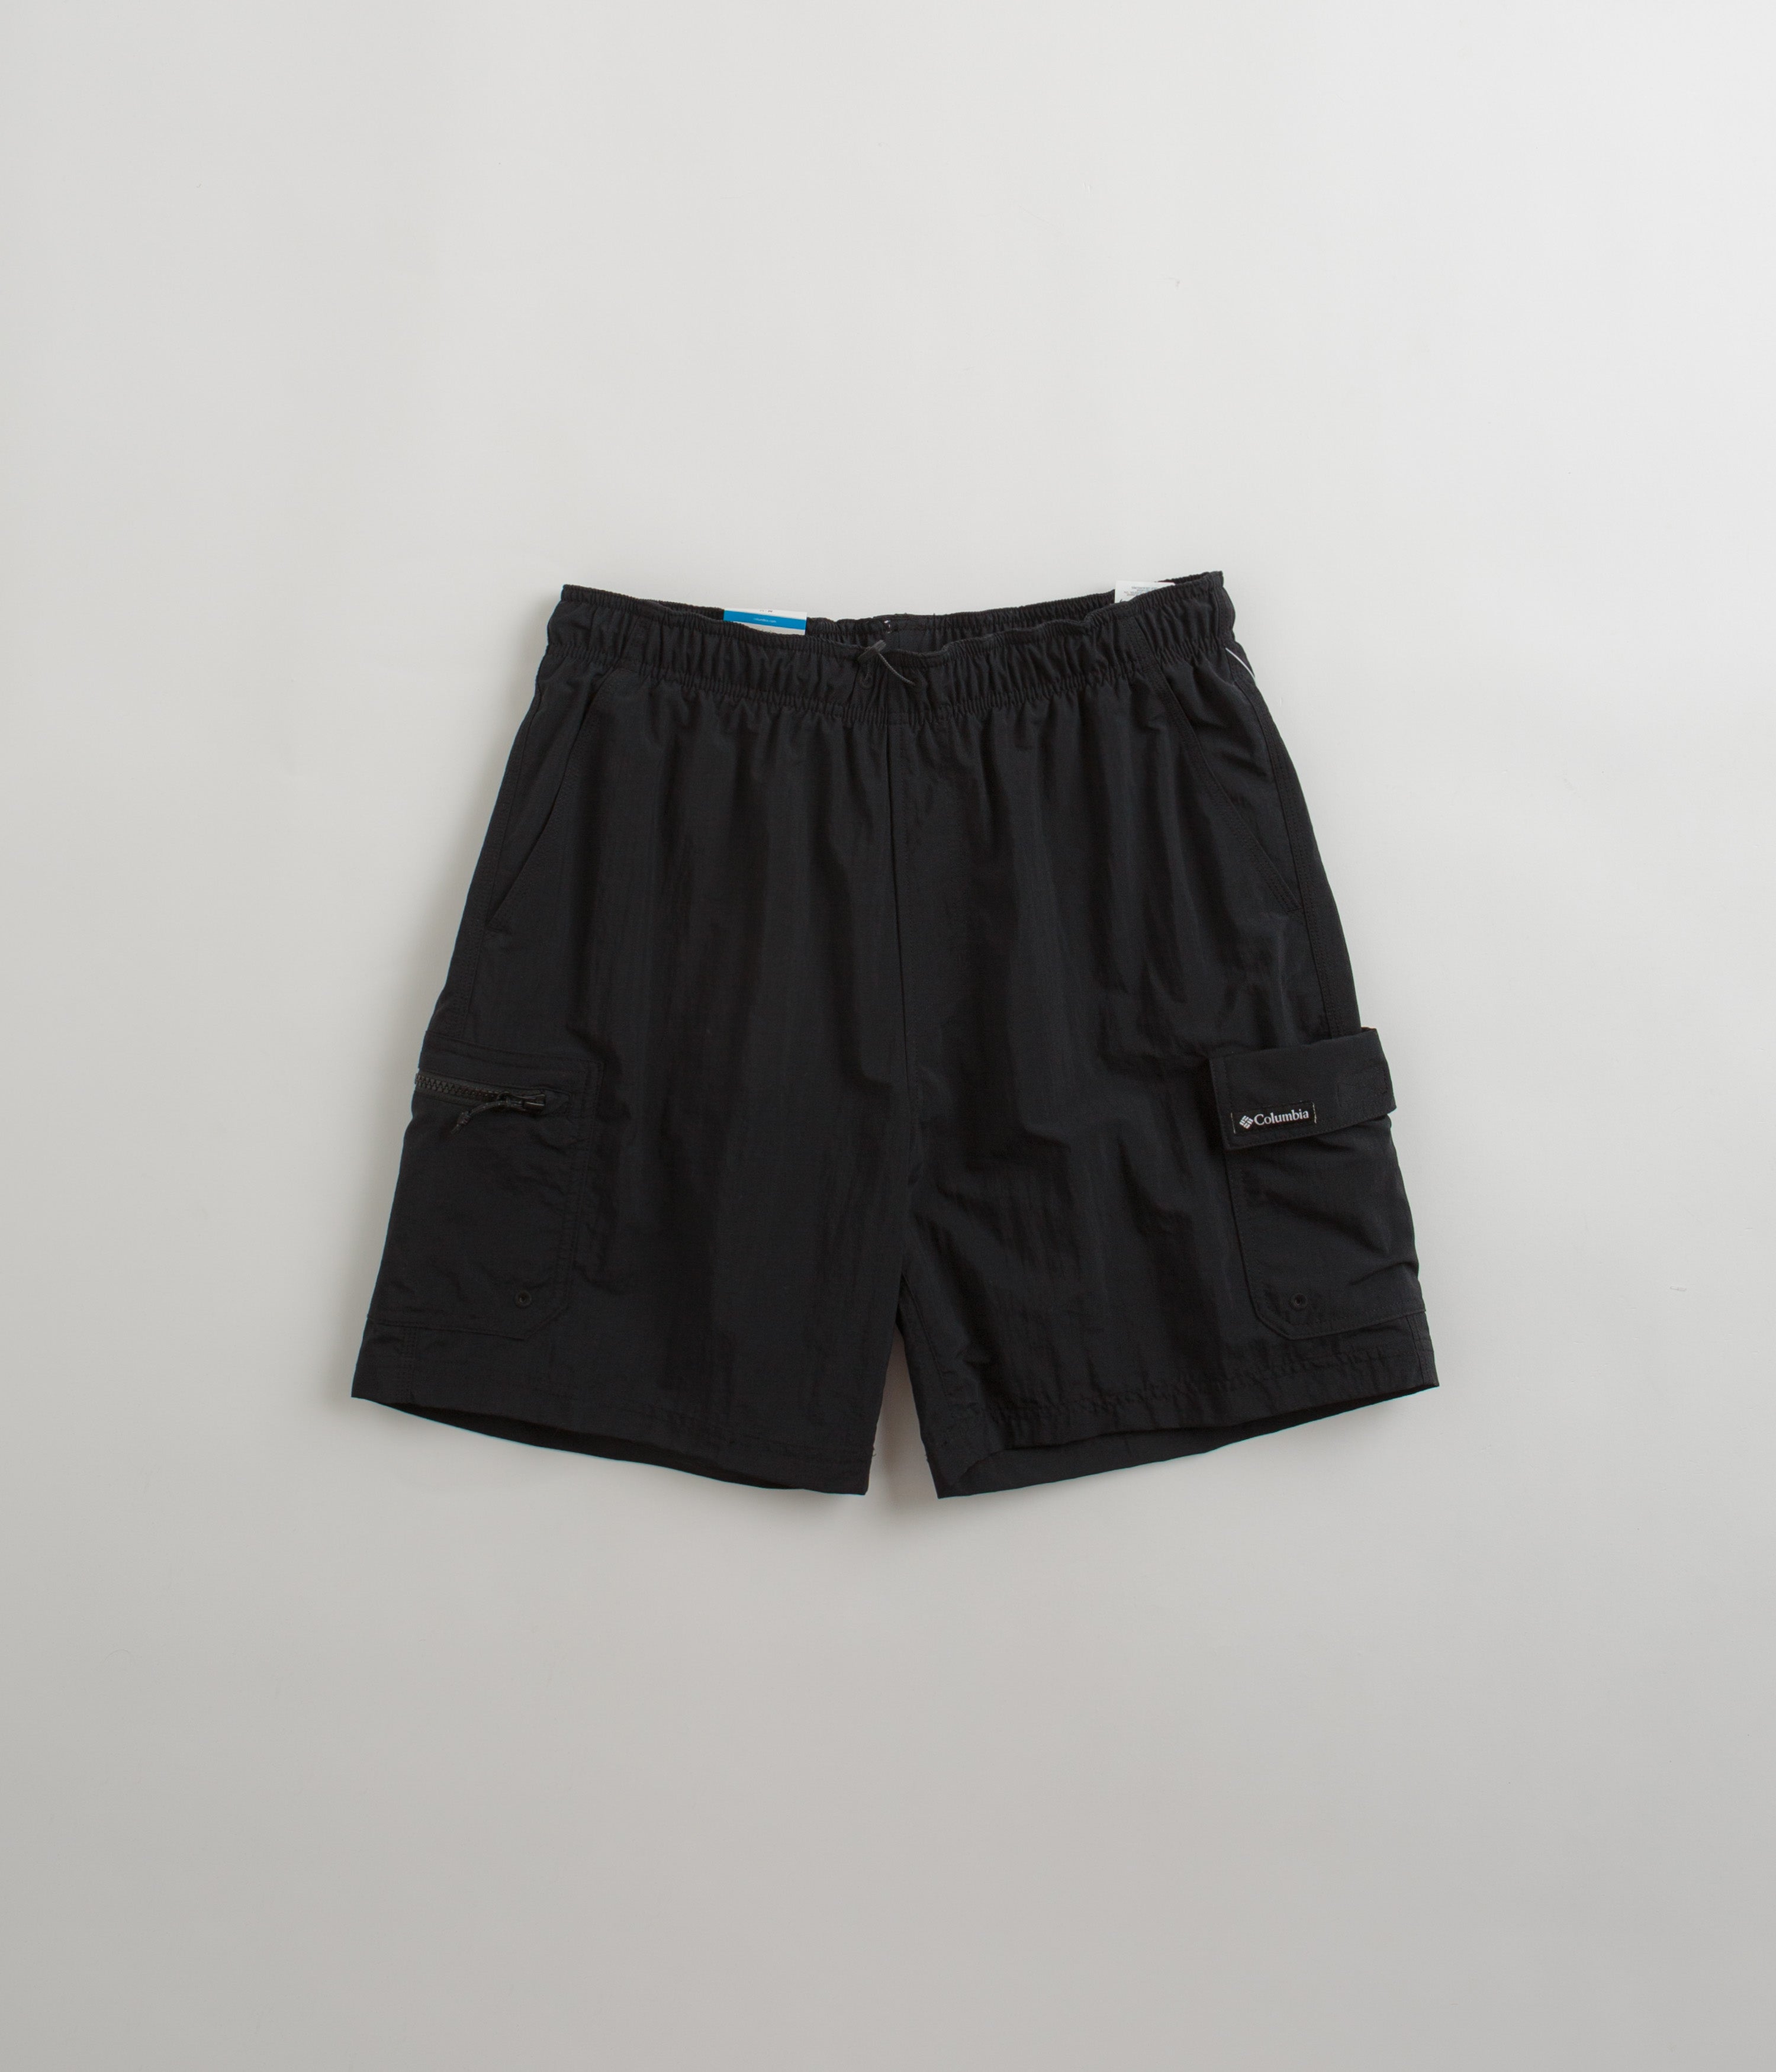 Image of Columbia Summerdry Brief 7" Shorts